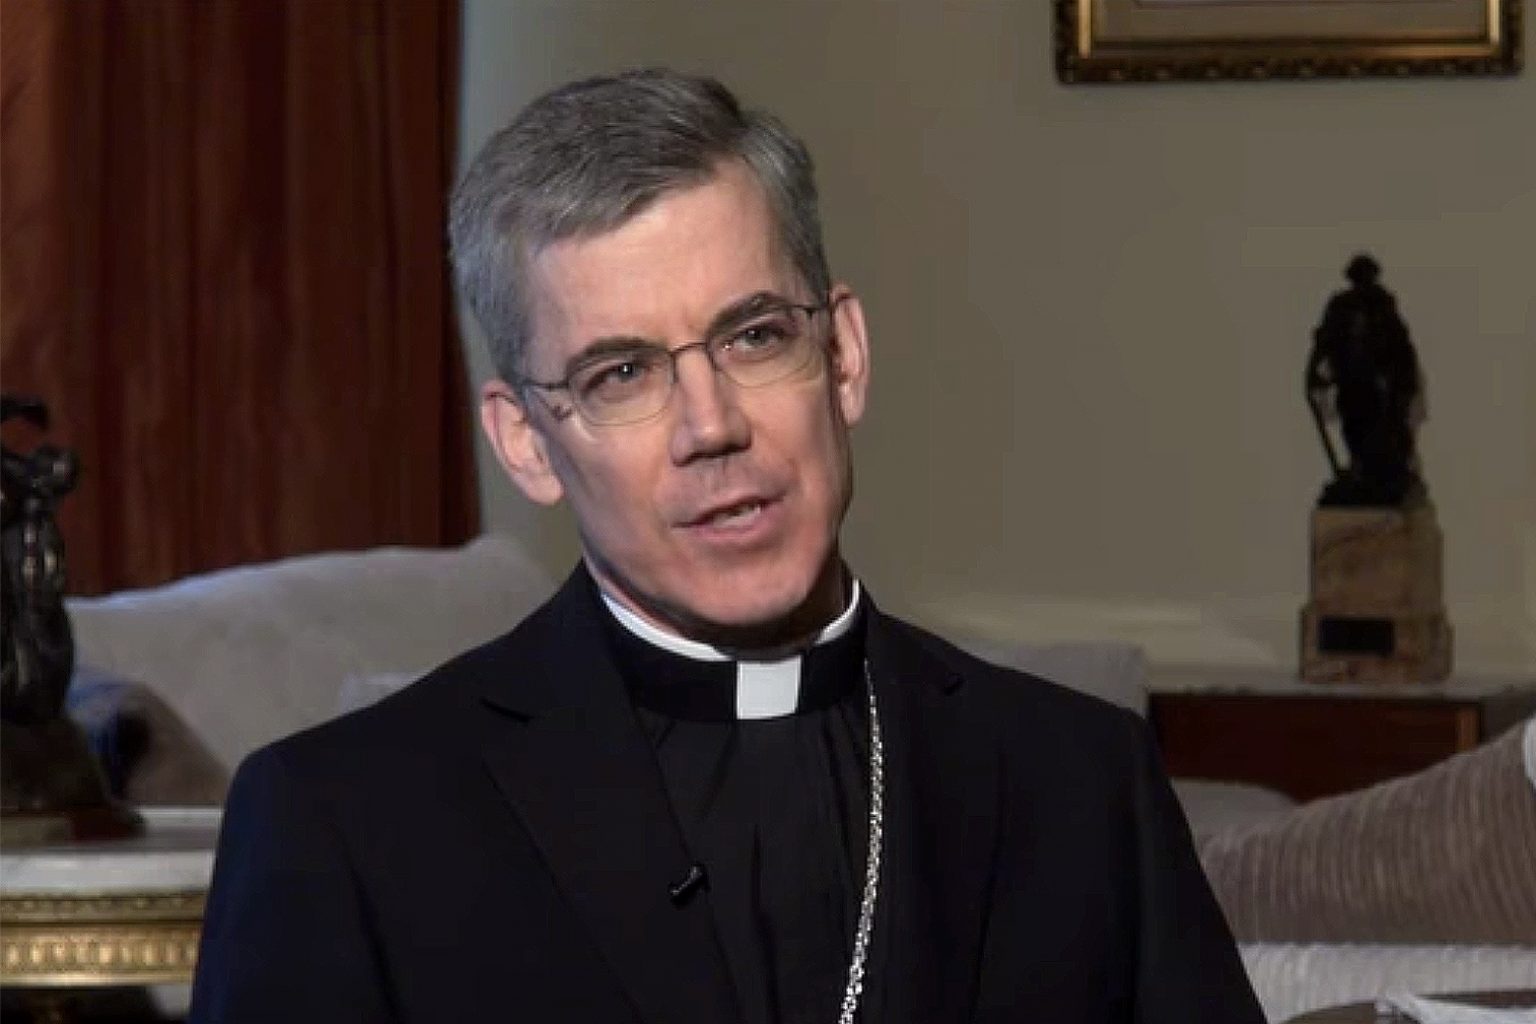 New Vatican envoy to arrive in Manila on Sunday